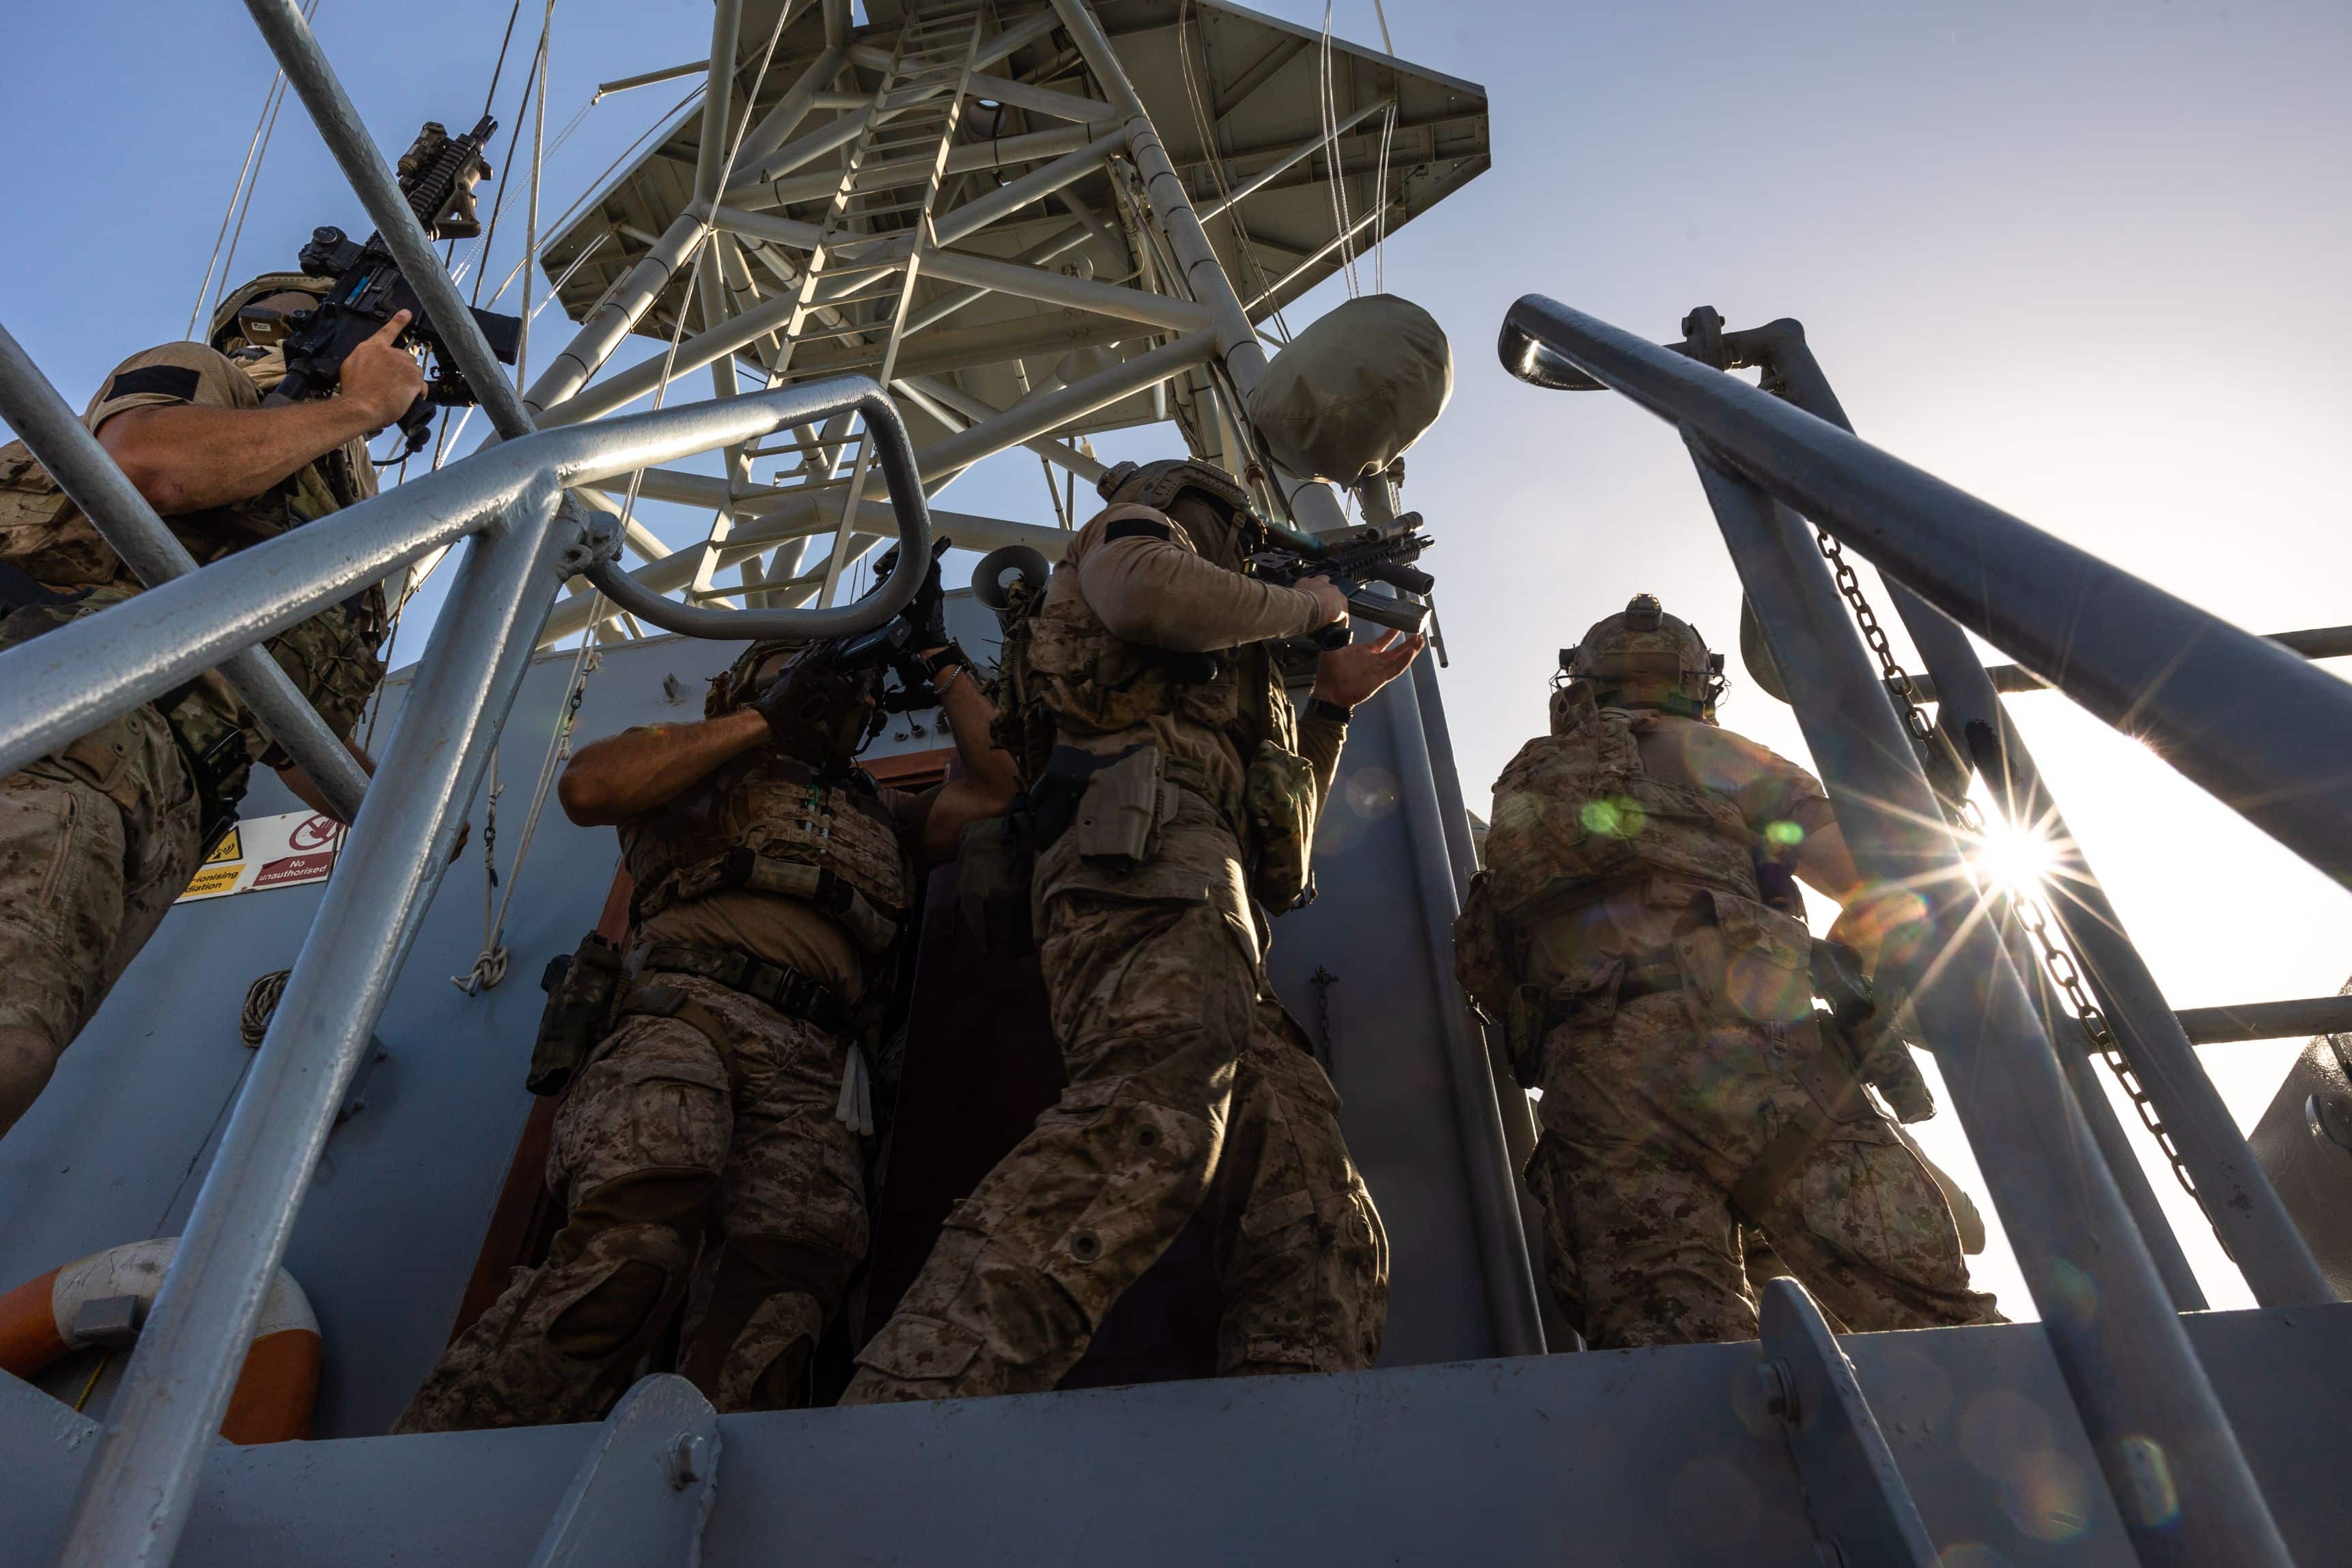 Members of US Naval Special Warfare Task Unit Europe (NSWTU-E) conduct maritime Visit, Board, Search and Seizure (VBSS) training using Colt MK 18 carbines alongside a Cypriot Underwater Demolition Team (MYK) in Cyprus, Thursday September 9th, 2021. Joint Training in the Eastern Mediterranean is essential in maintaining interoperability and strong relationships with ally and partner nations, ensuring stability throughout the theater. (U.S. Army Photo by Sgt. Patrik Orcutt)